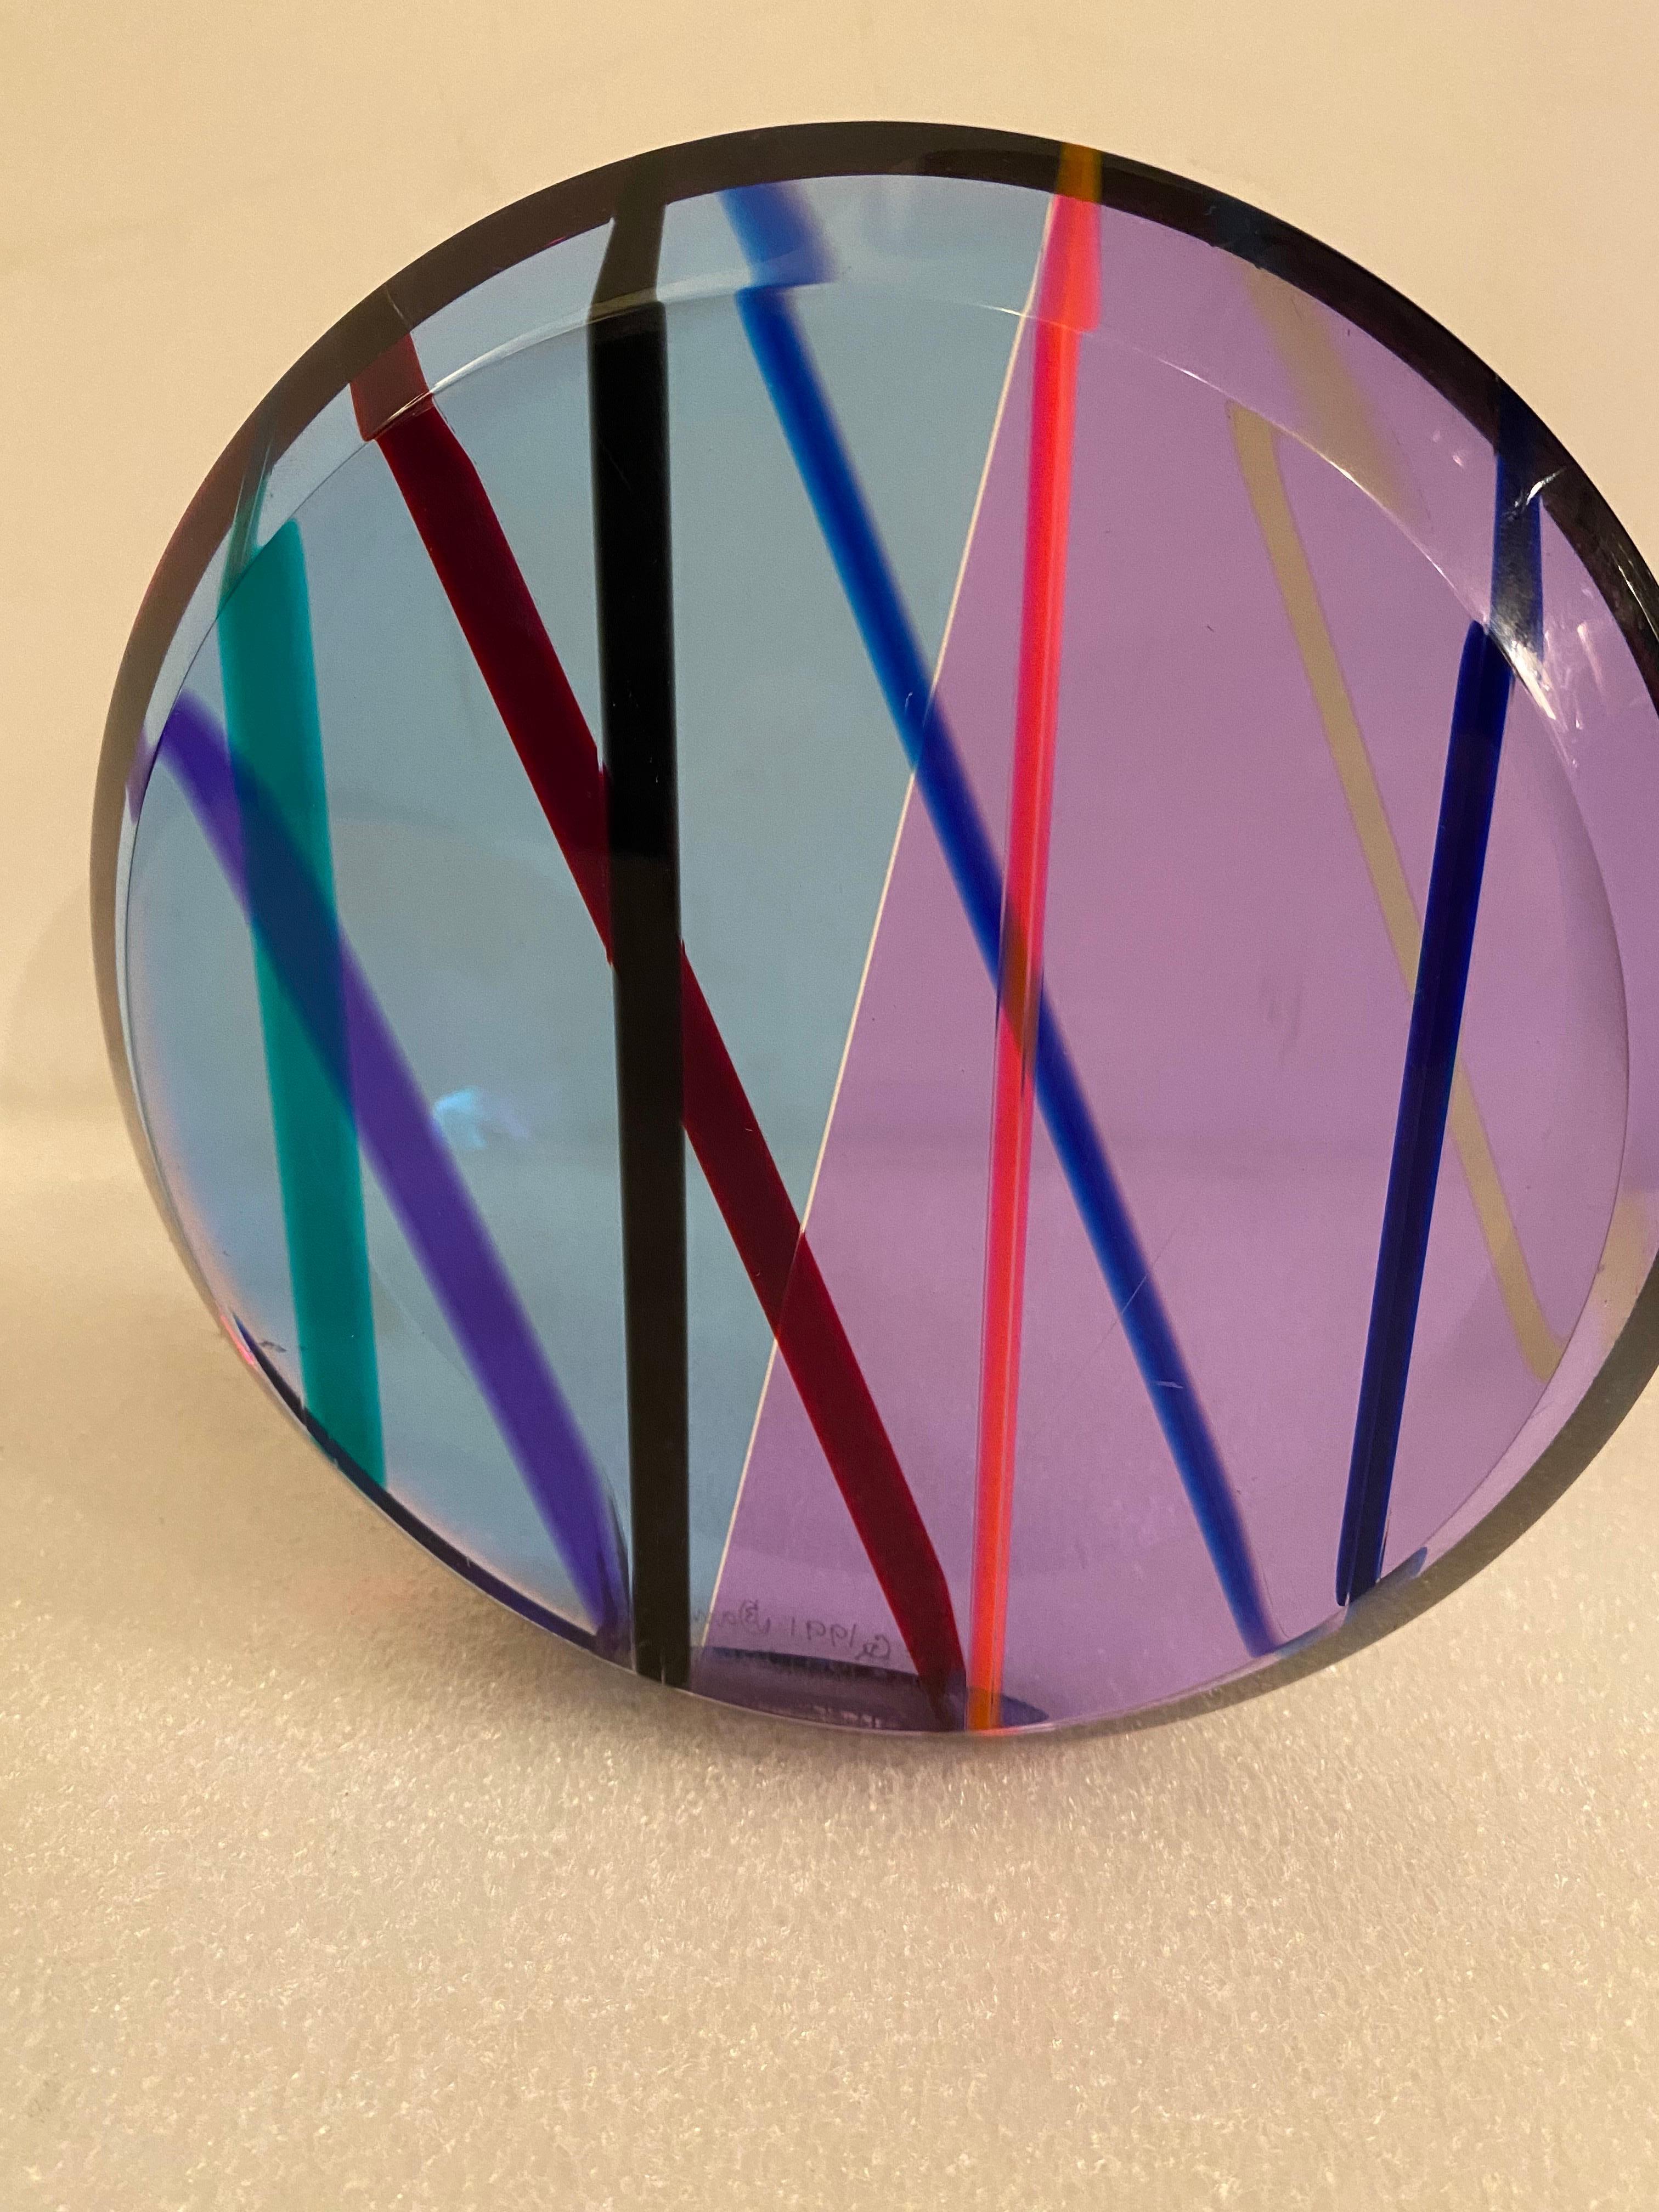 Pair of Lucite Sculptural Circles in the style of Charles Hollis Jones.  Nice colors of purples and blues.  Spheres are highly polished and in nice shape.  They are dated and signed, but name is hard to read.